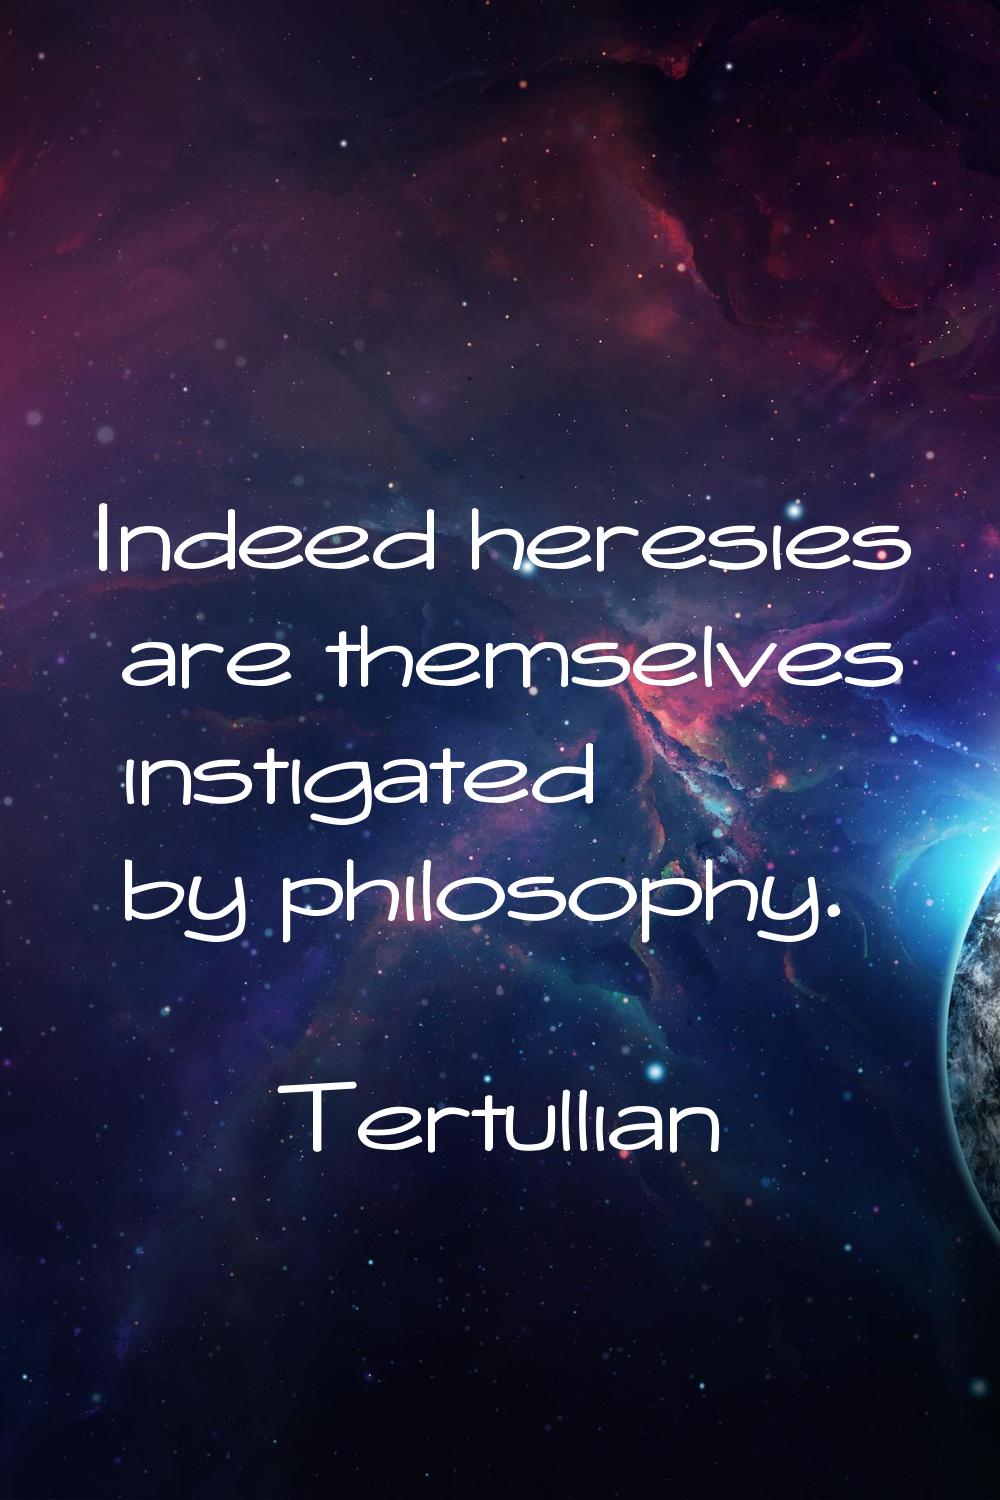 Indeed heresies are themselves instigated by philosophy.